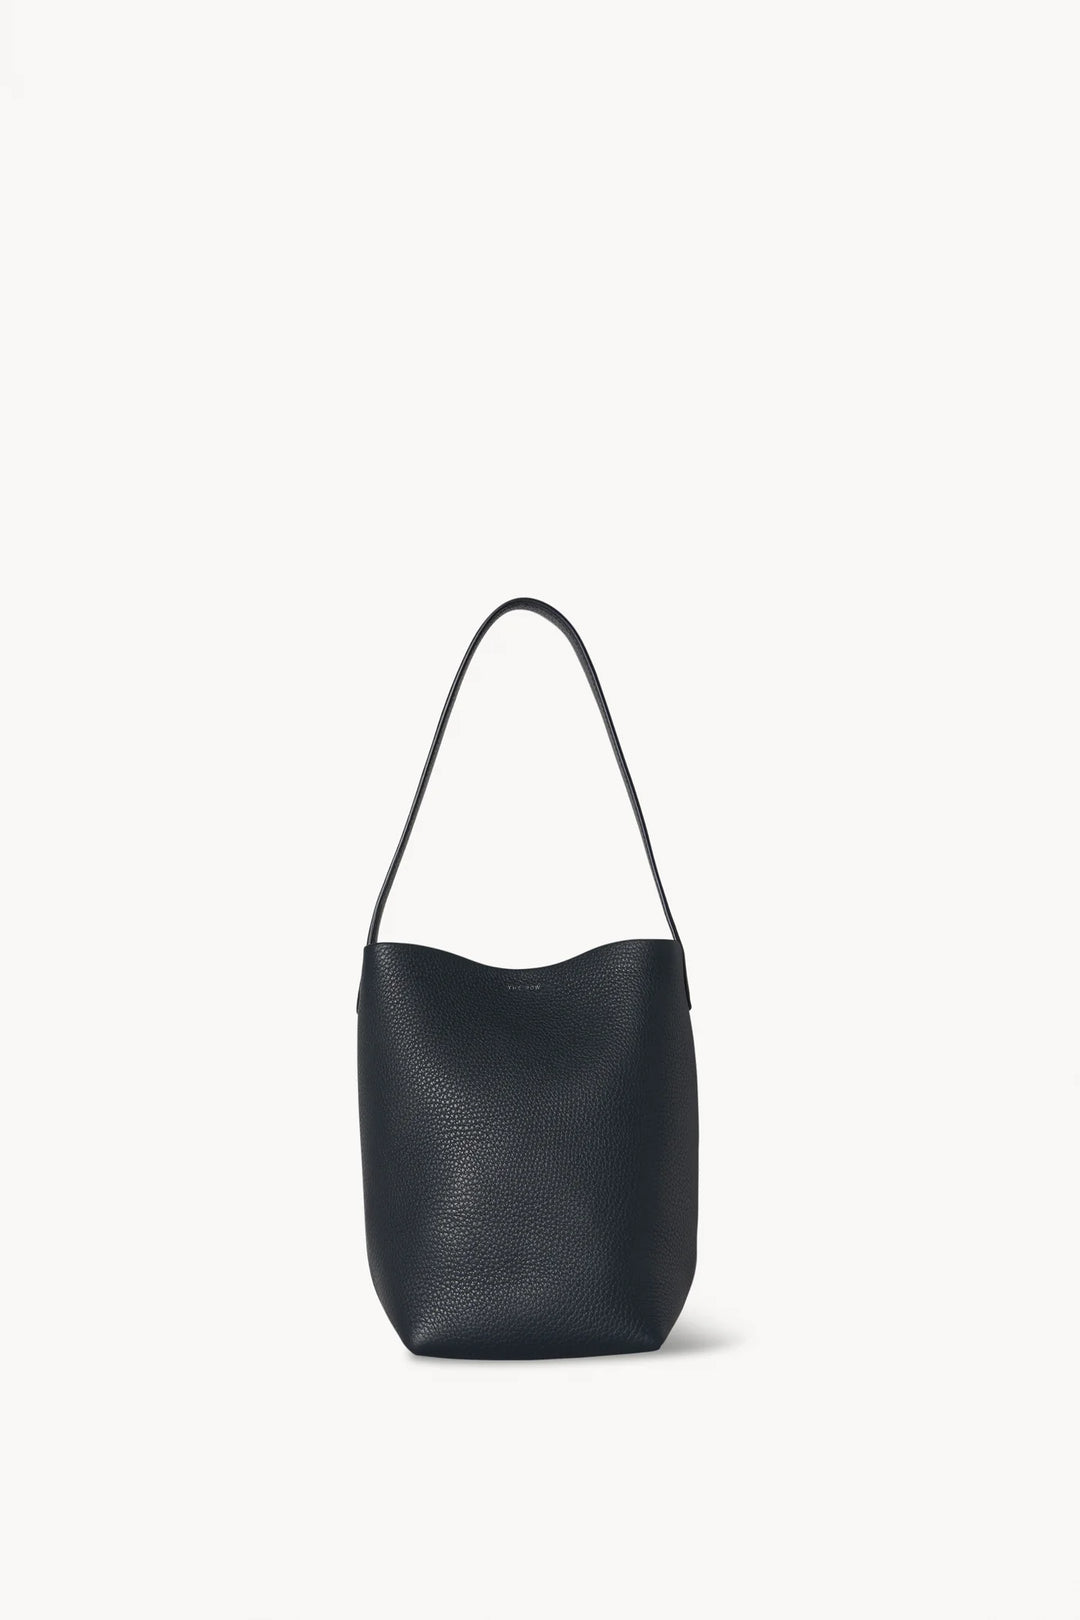 THE ROW SMALL N/S PARK TOTE BAG  IN LEATHER